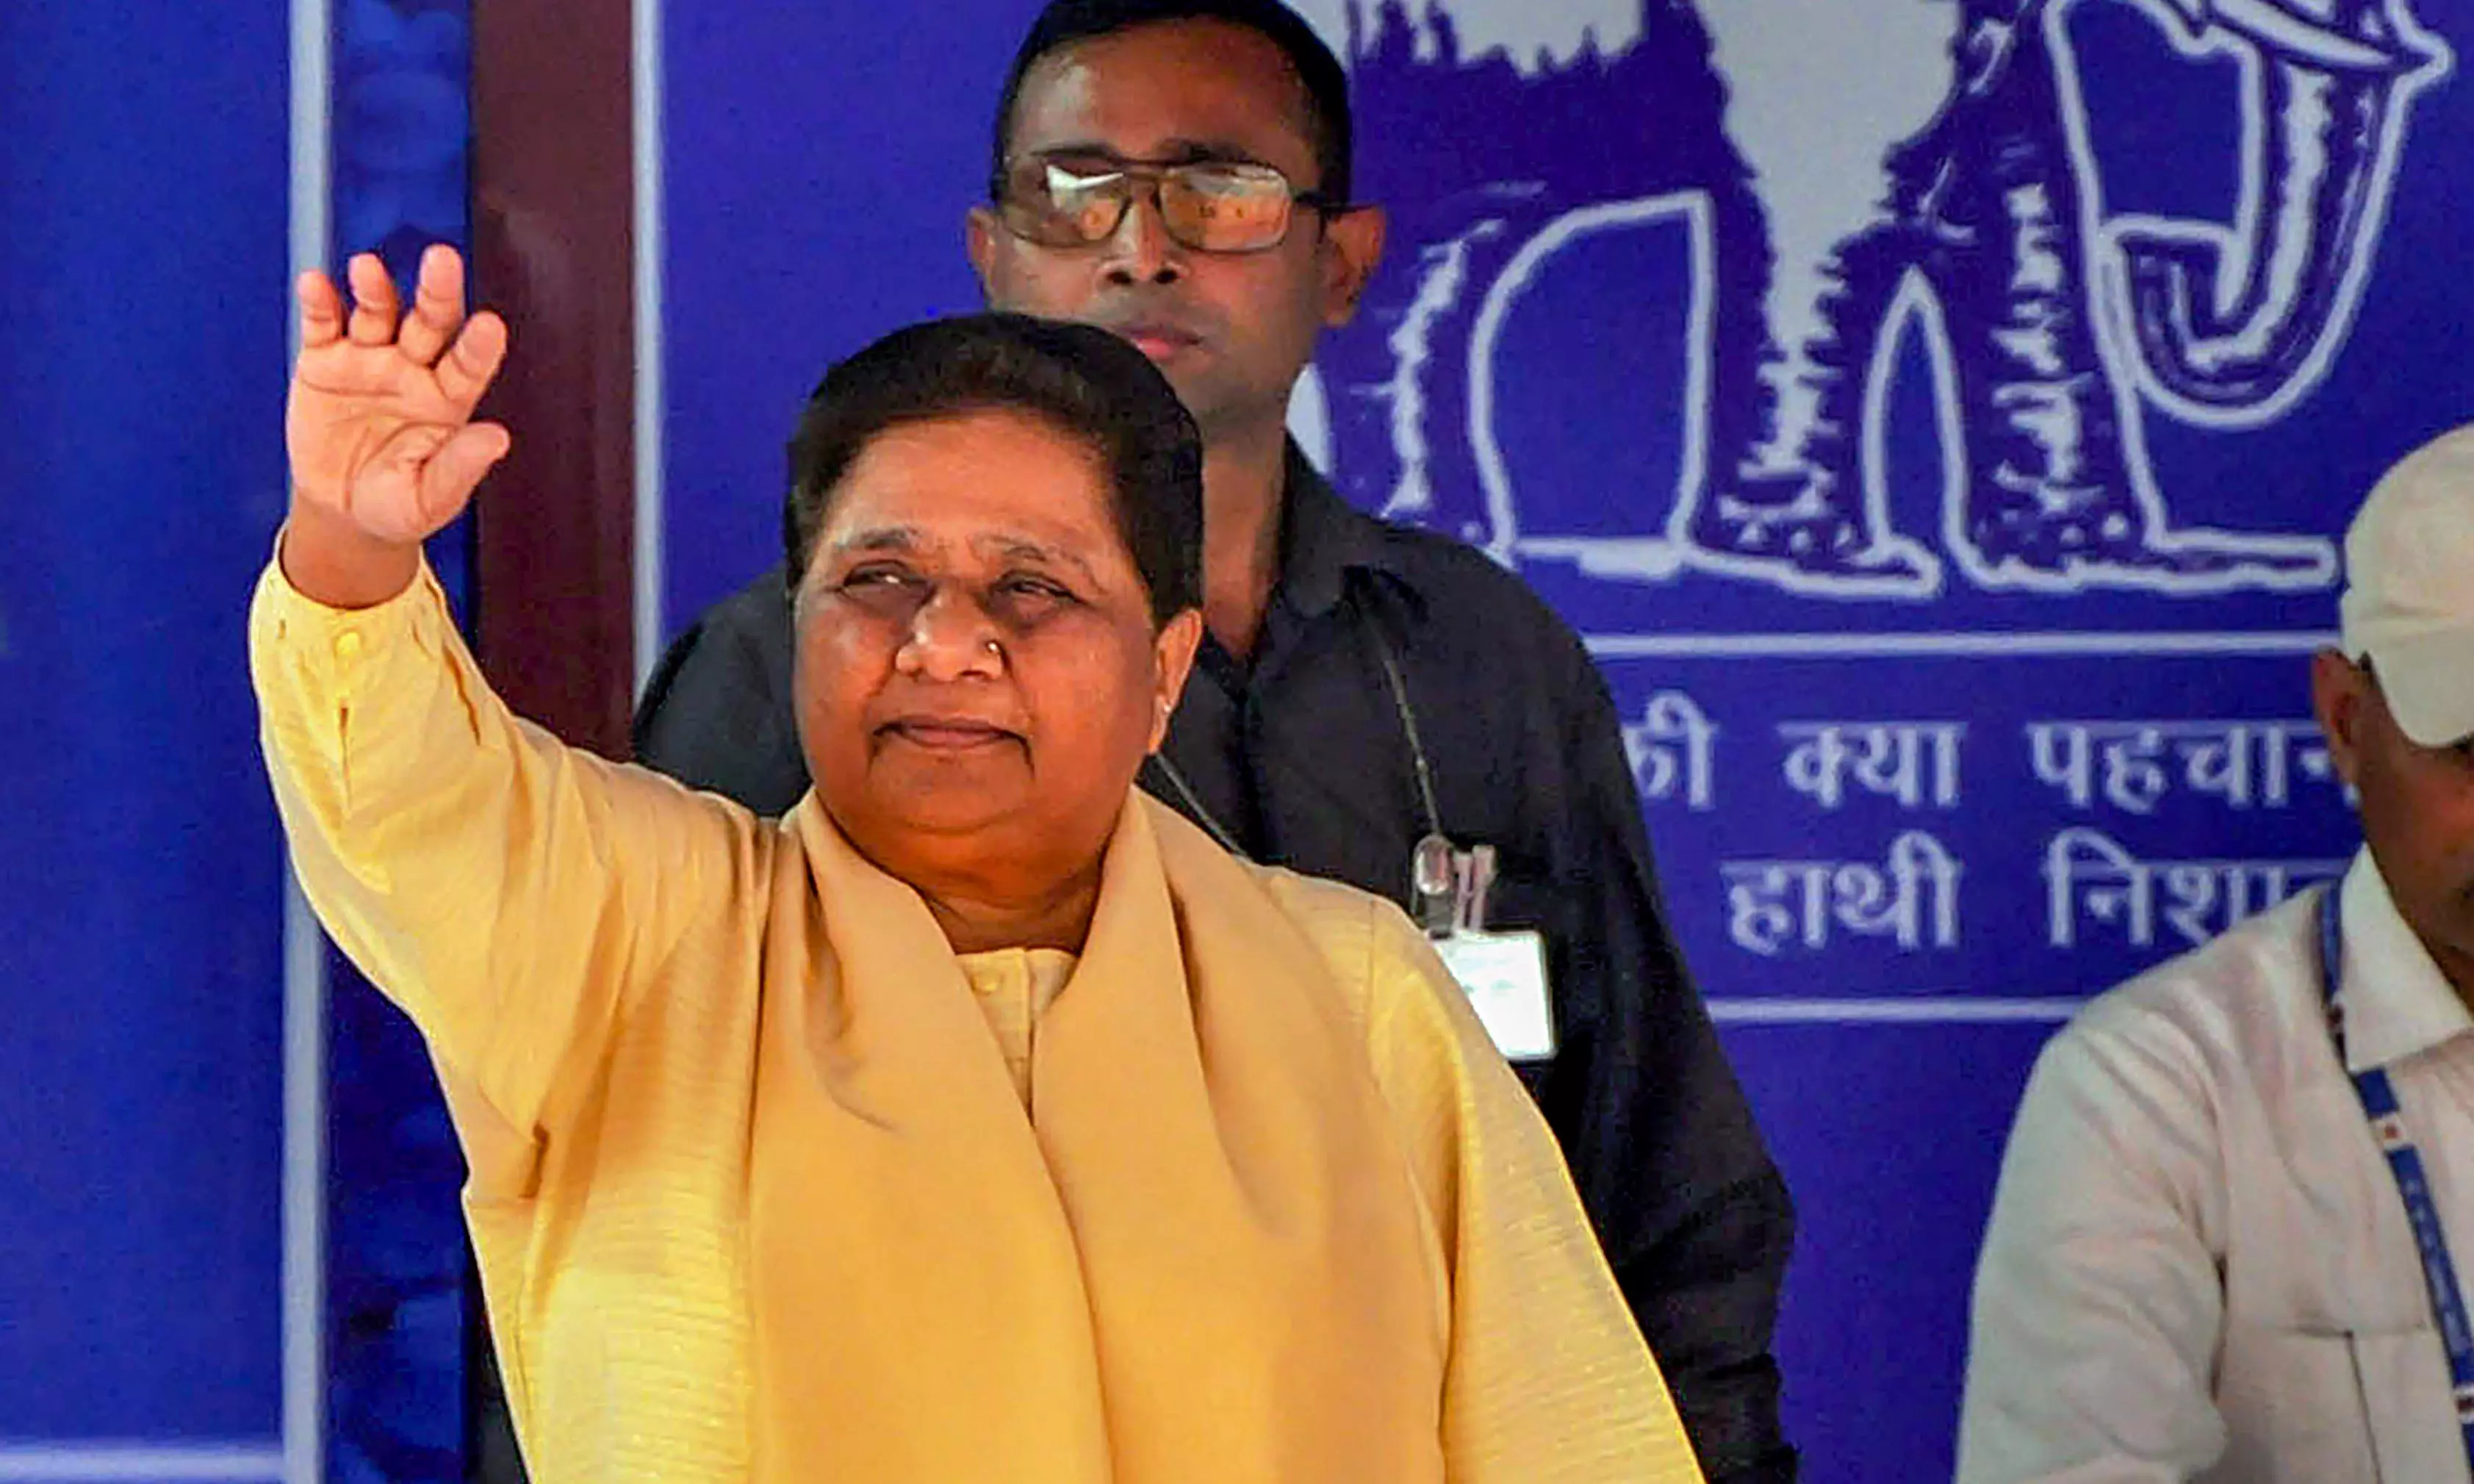 Didn’t join alliance with BJP or Cong as both cheated people: Mayawati